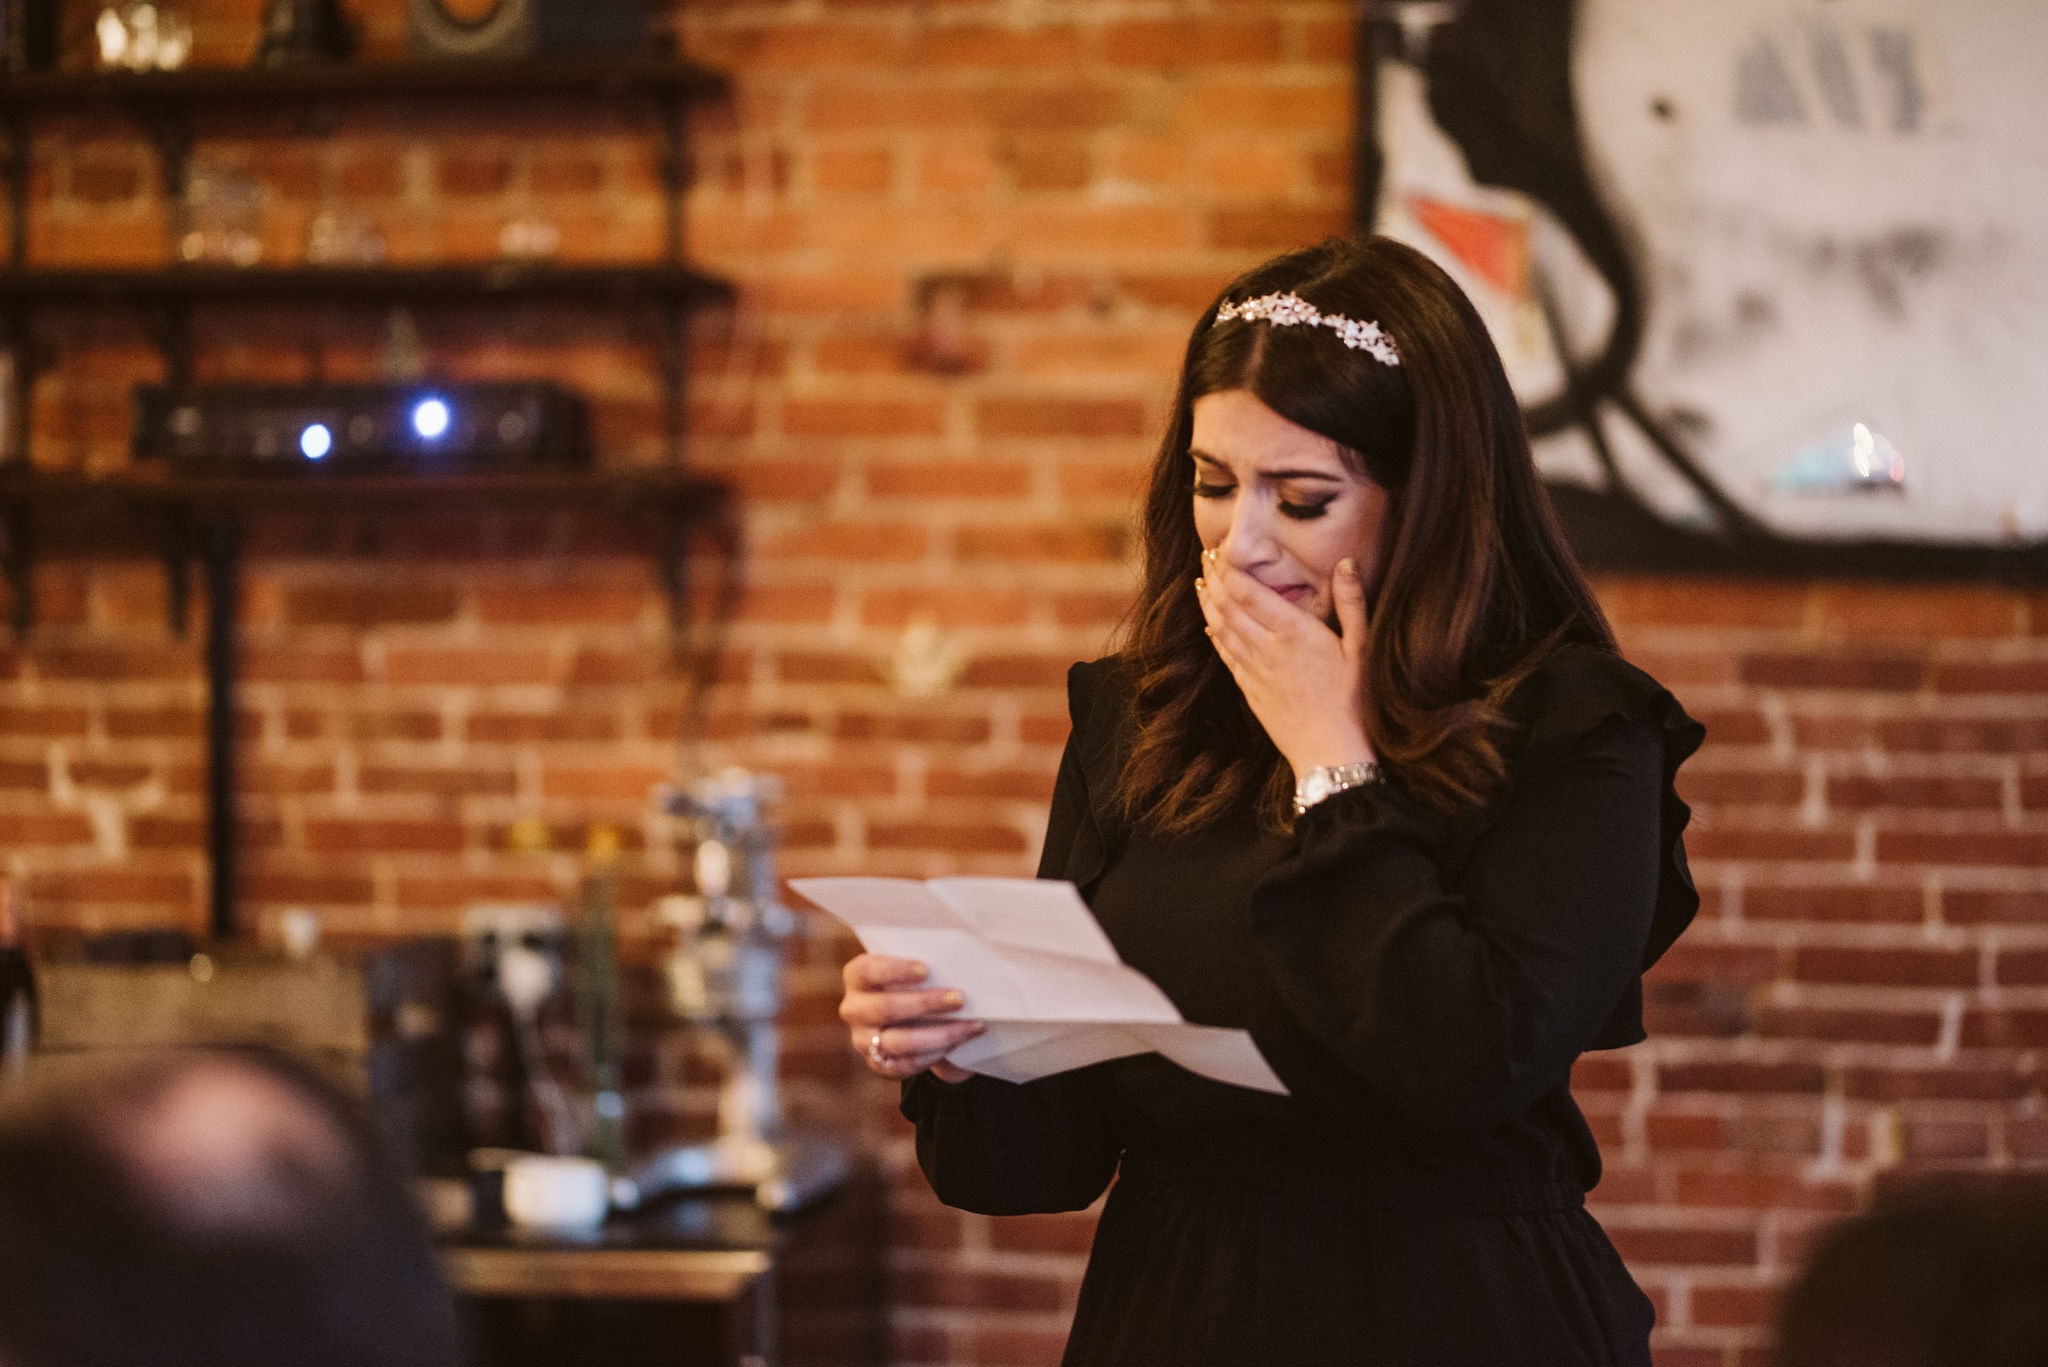  Washington DC, Baltimore Wedding Photographer, Intimate Wedding, Traditional, Classic, Big Bear Cafe, Guest Crying While Giving Speech, Happy Tears 